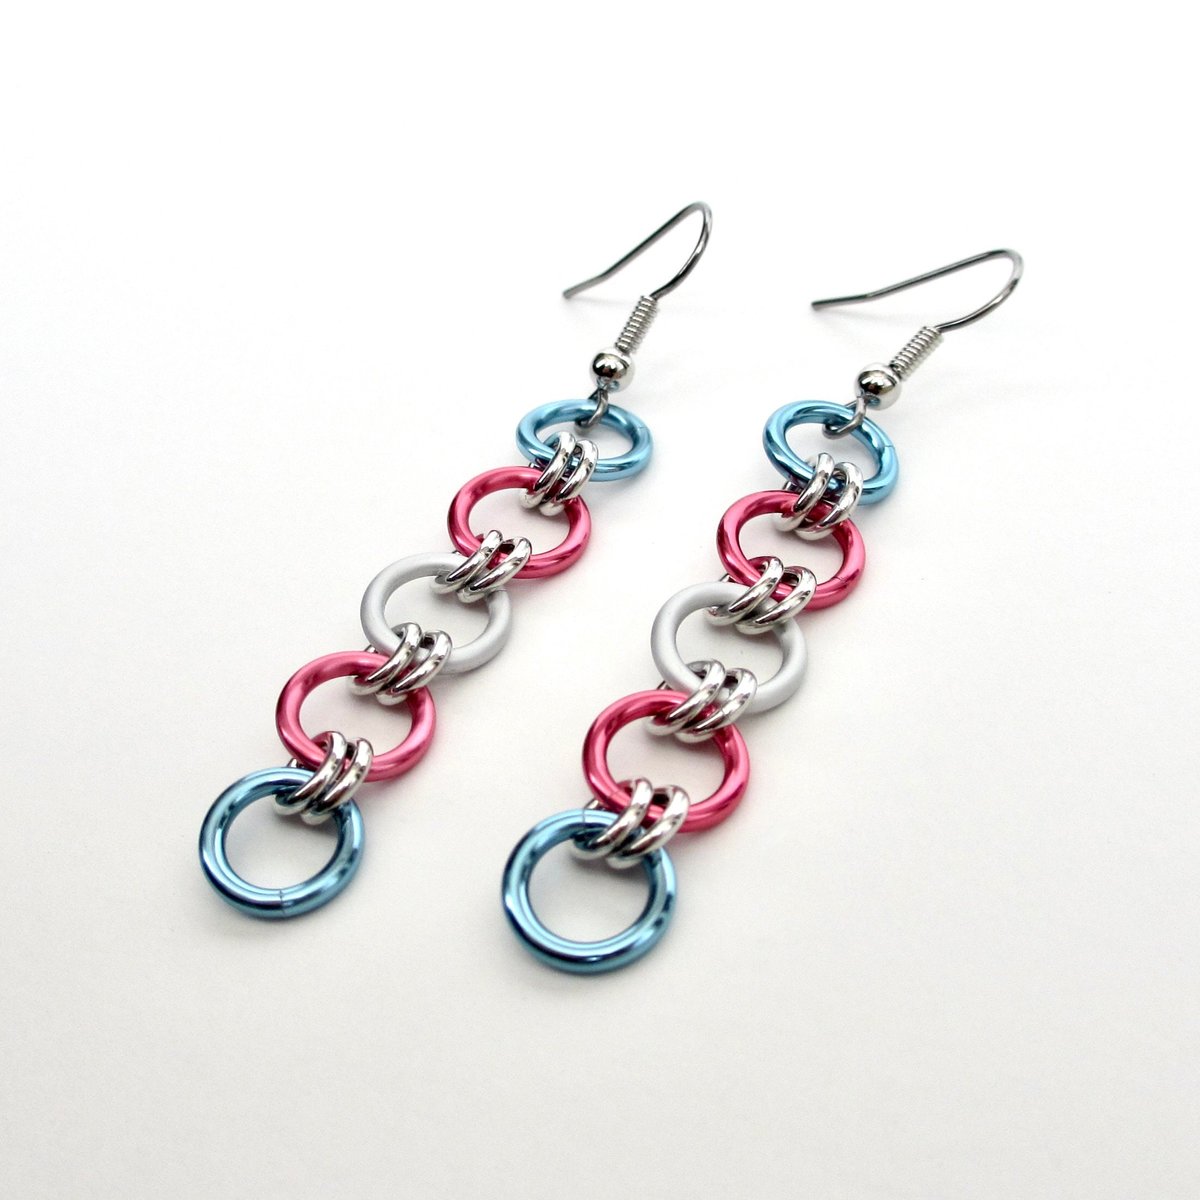 Trans pride flag earrings, simple LGBTQ chainmail jewelry